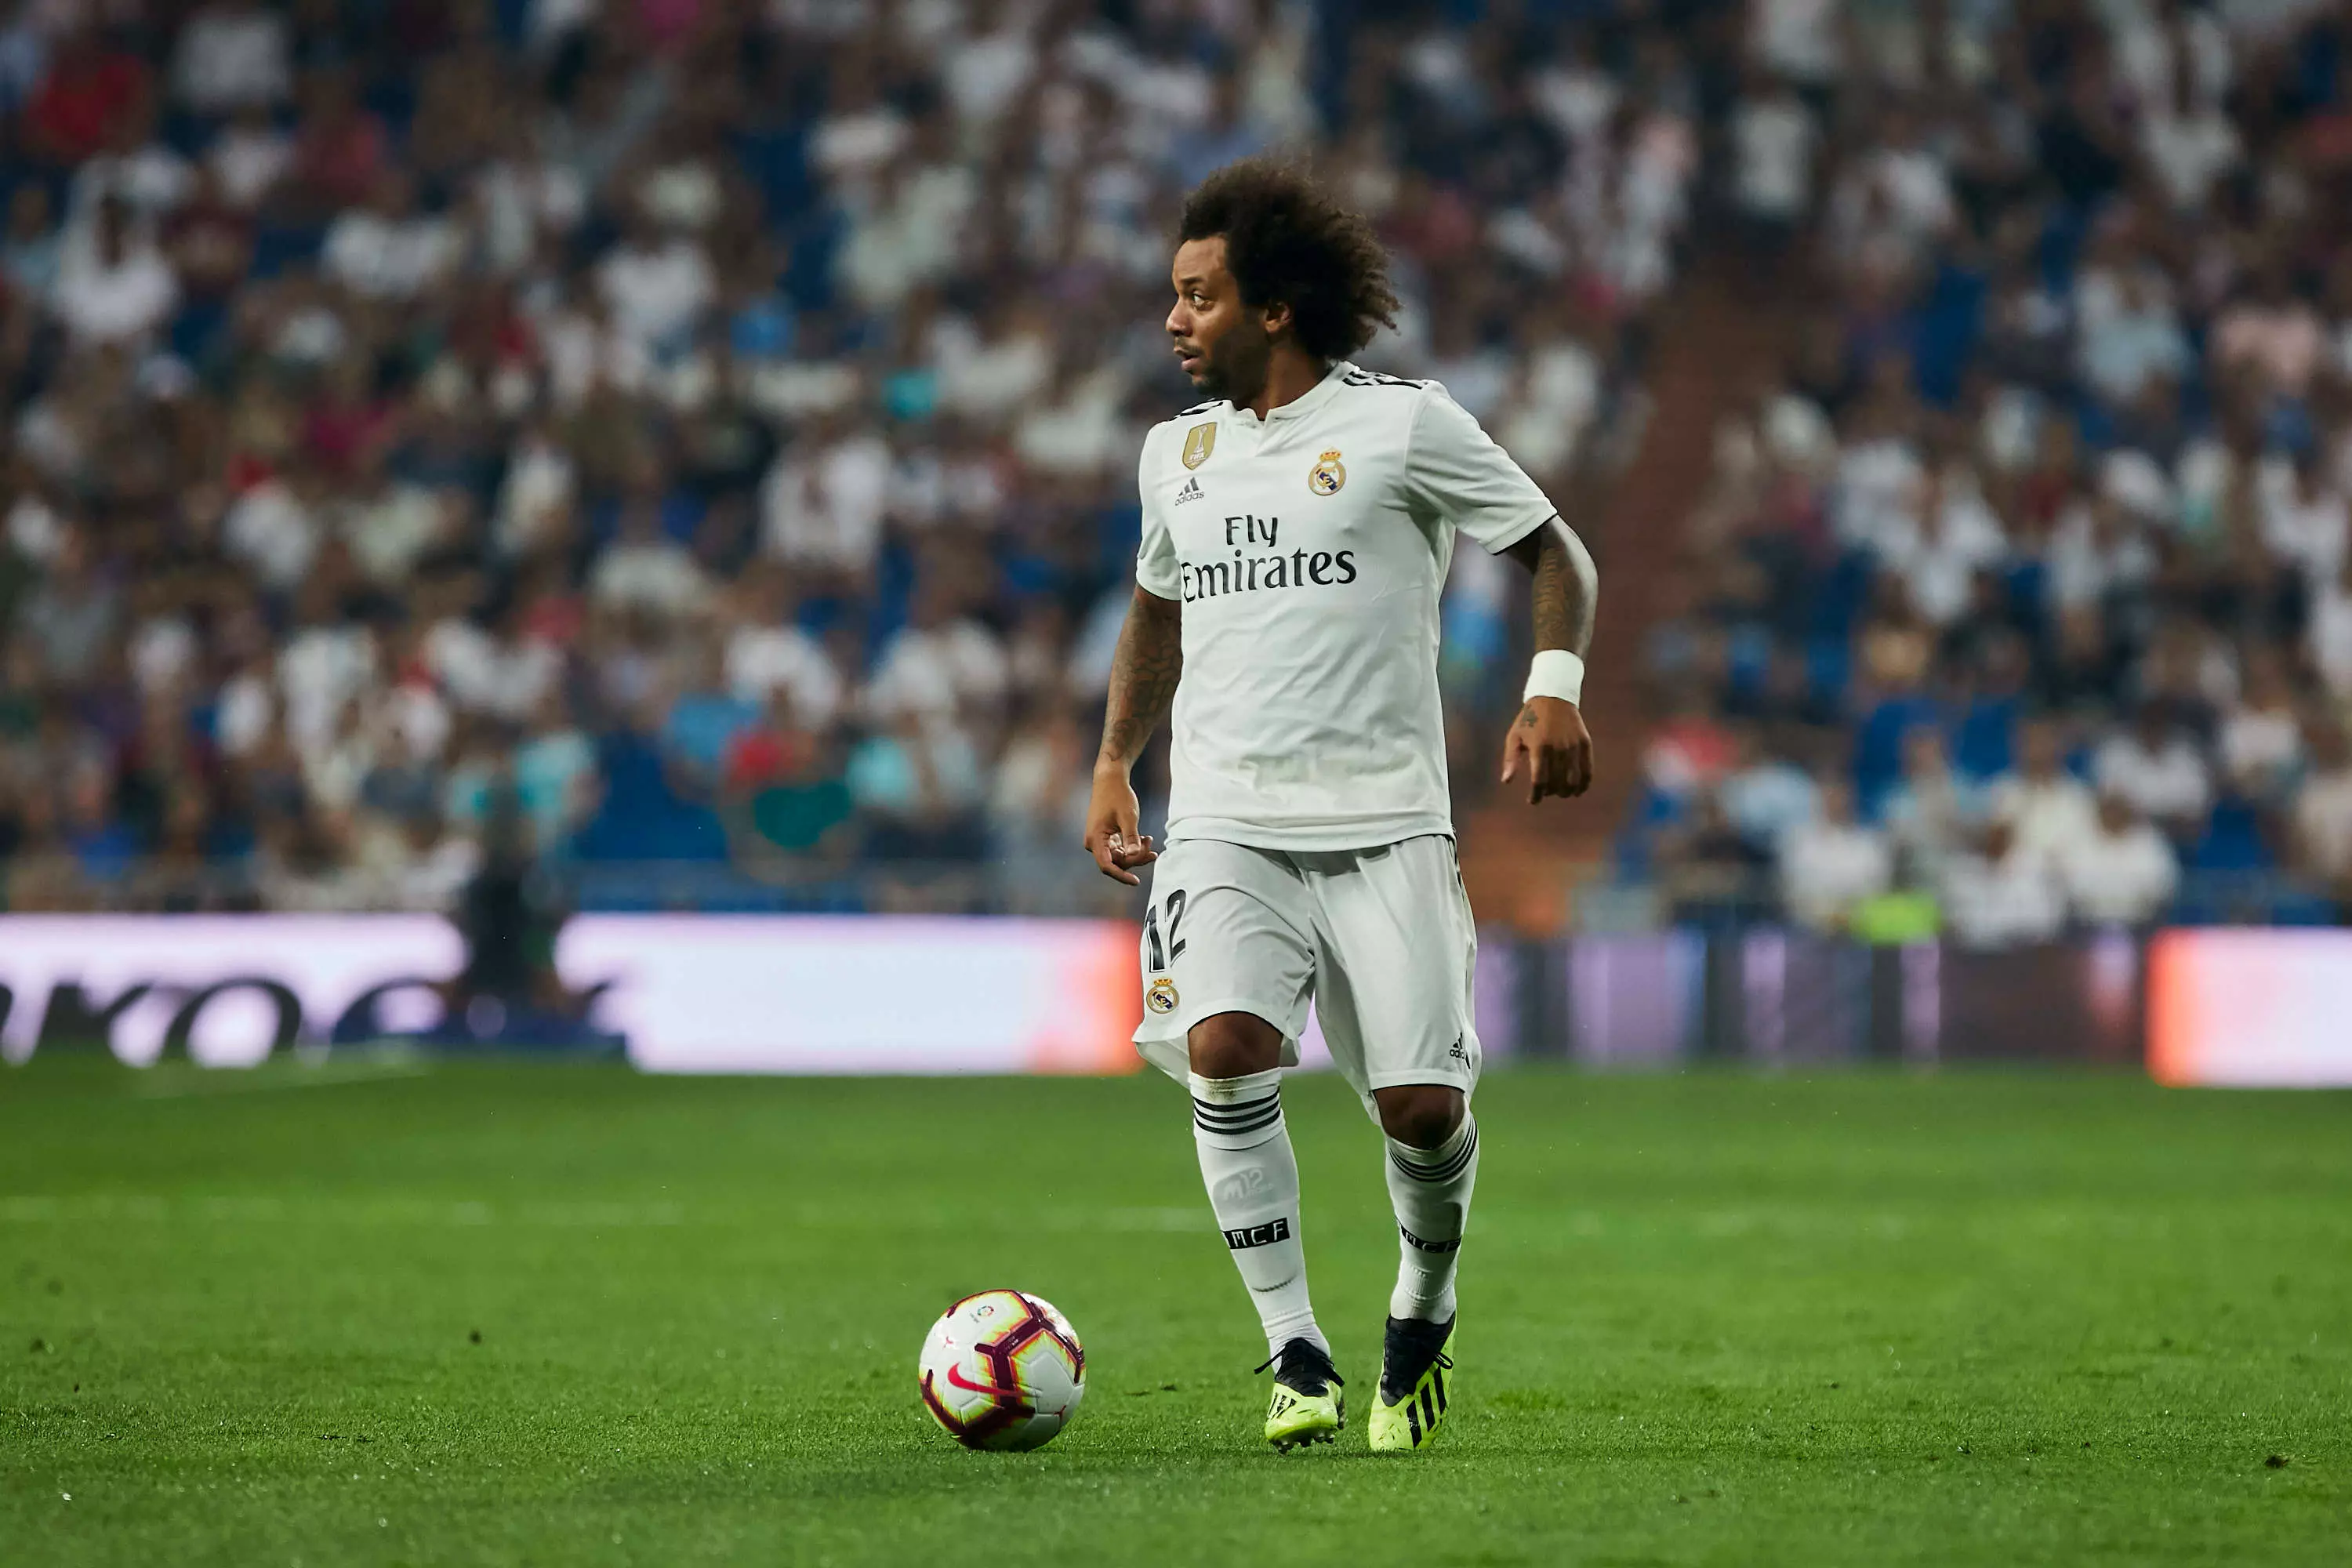 Potential Leak Reveals Five-Star Skillers In FIFA 19 Ahead Of Release